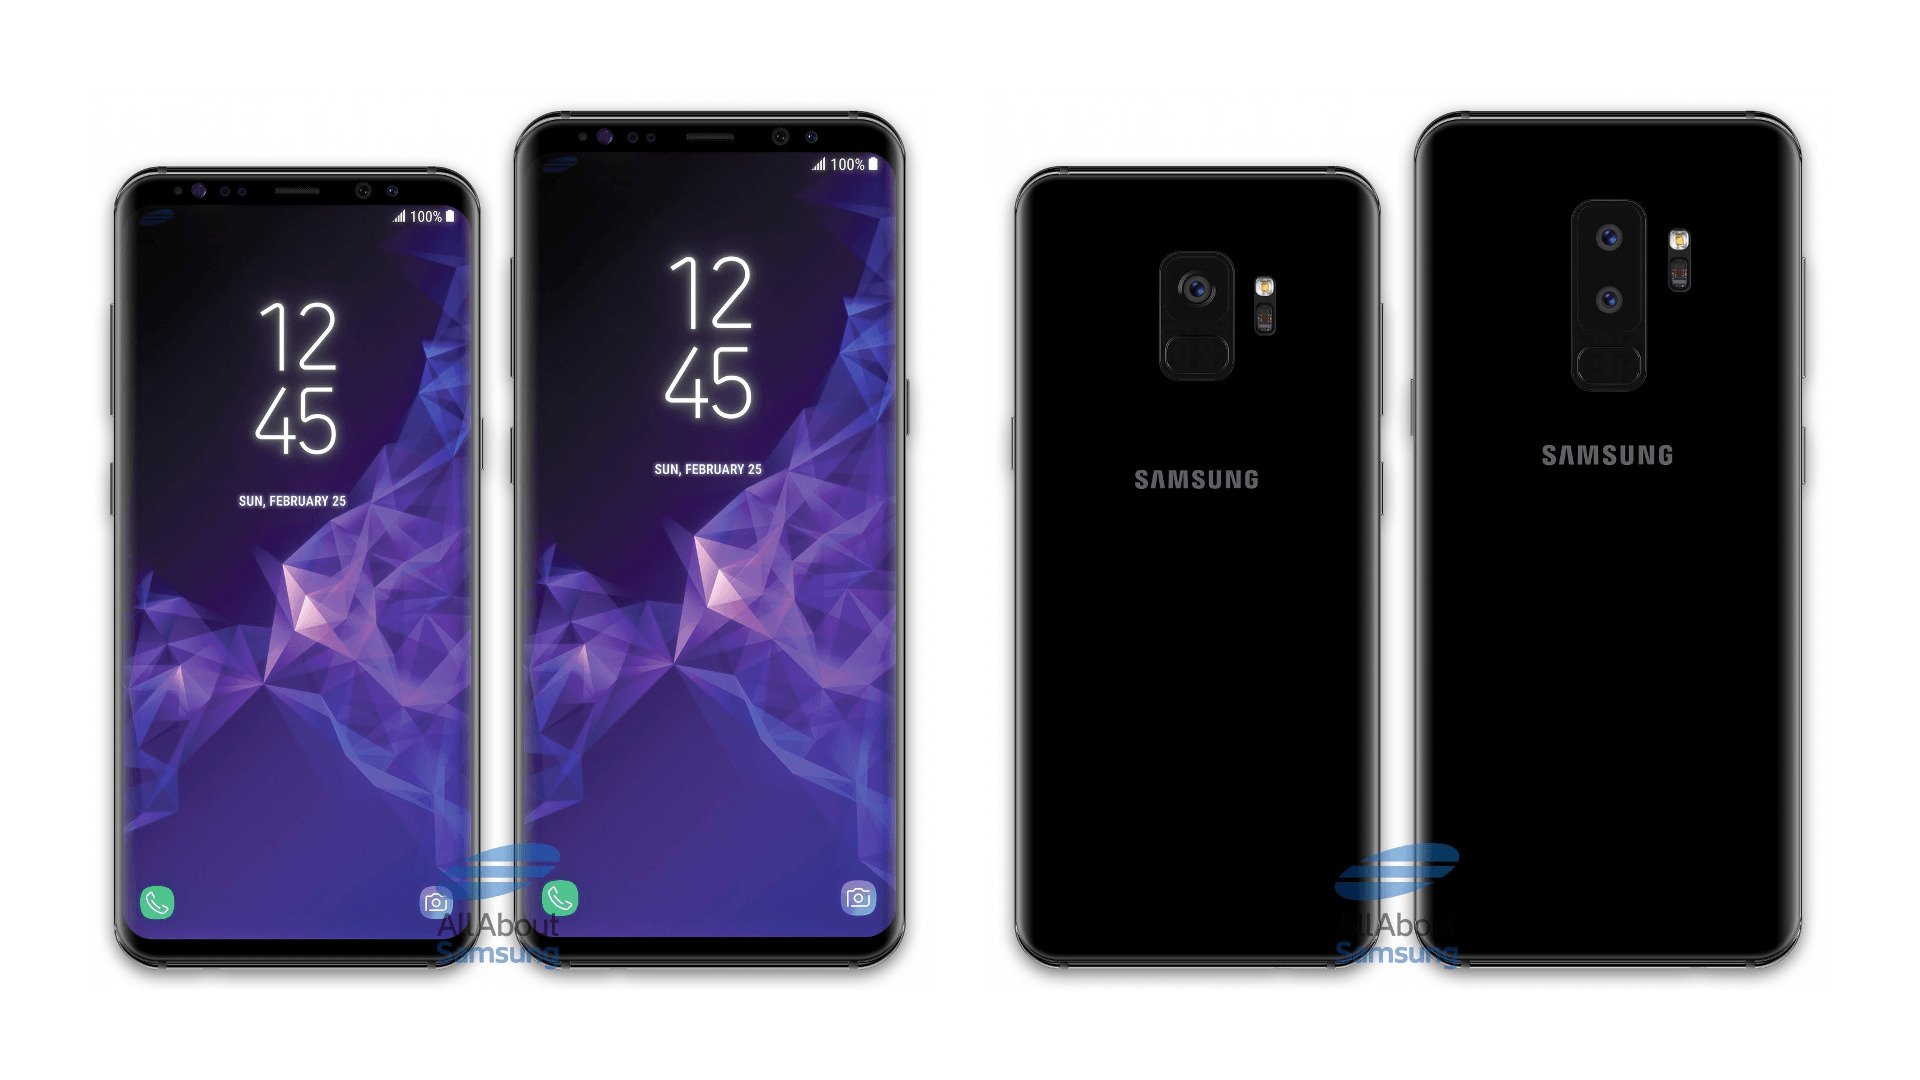 Samsung Galaxy S9 - Leaked Image